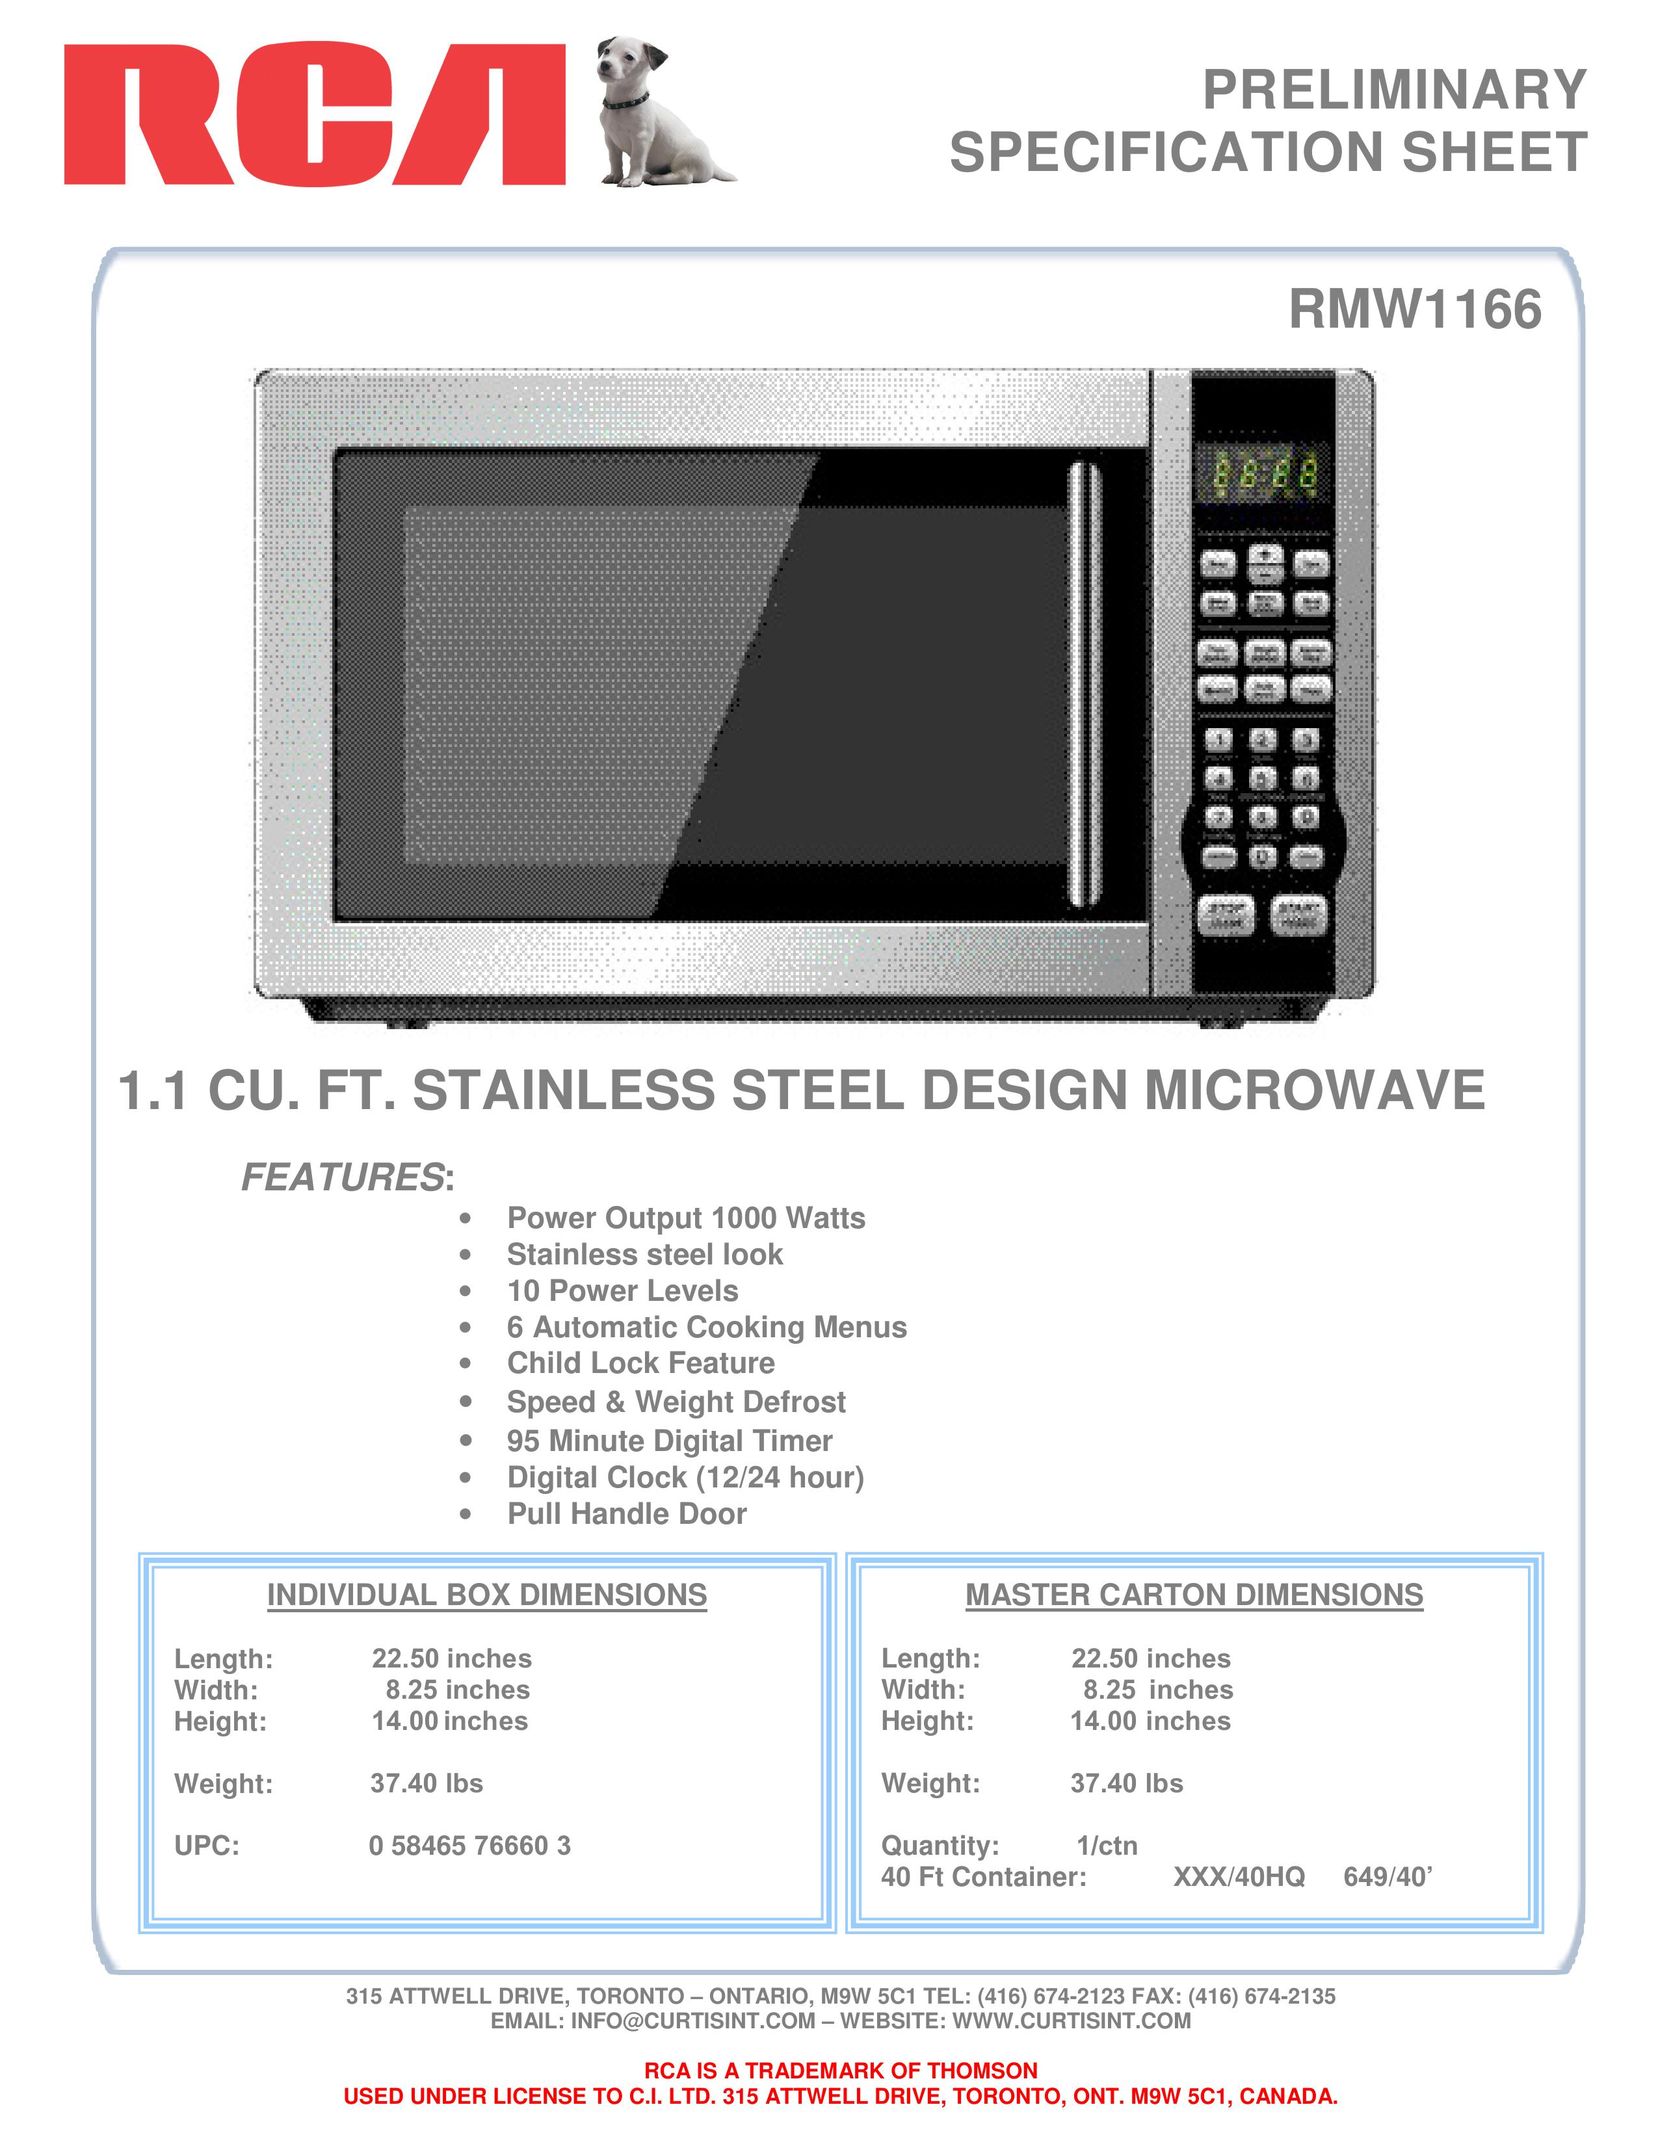 Curtis RMW1166 Microwave Oven User Manual